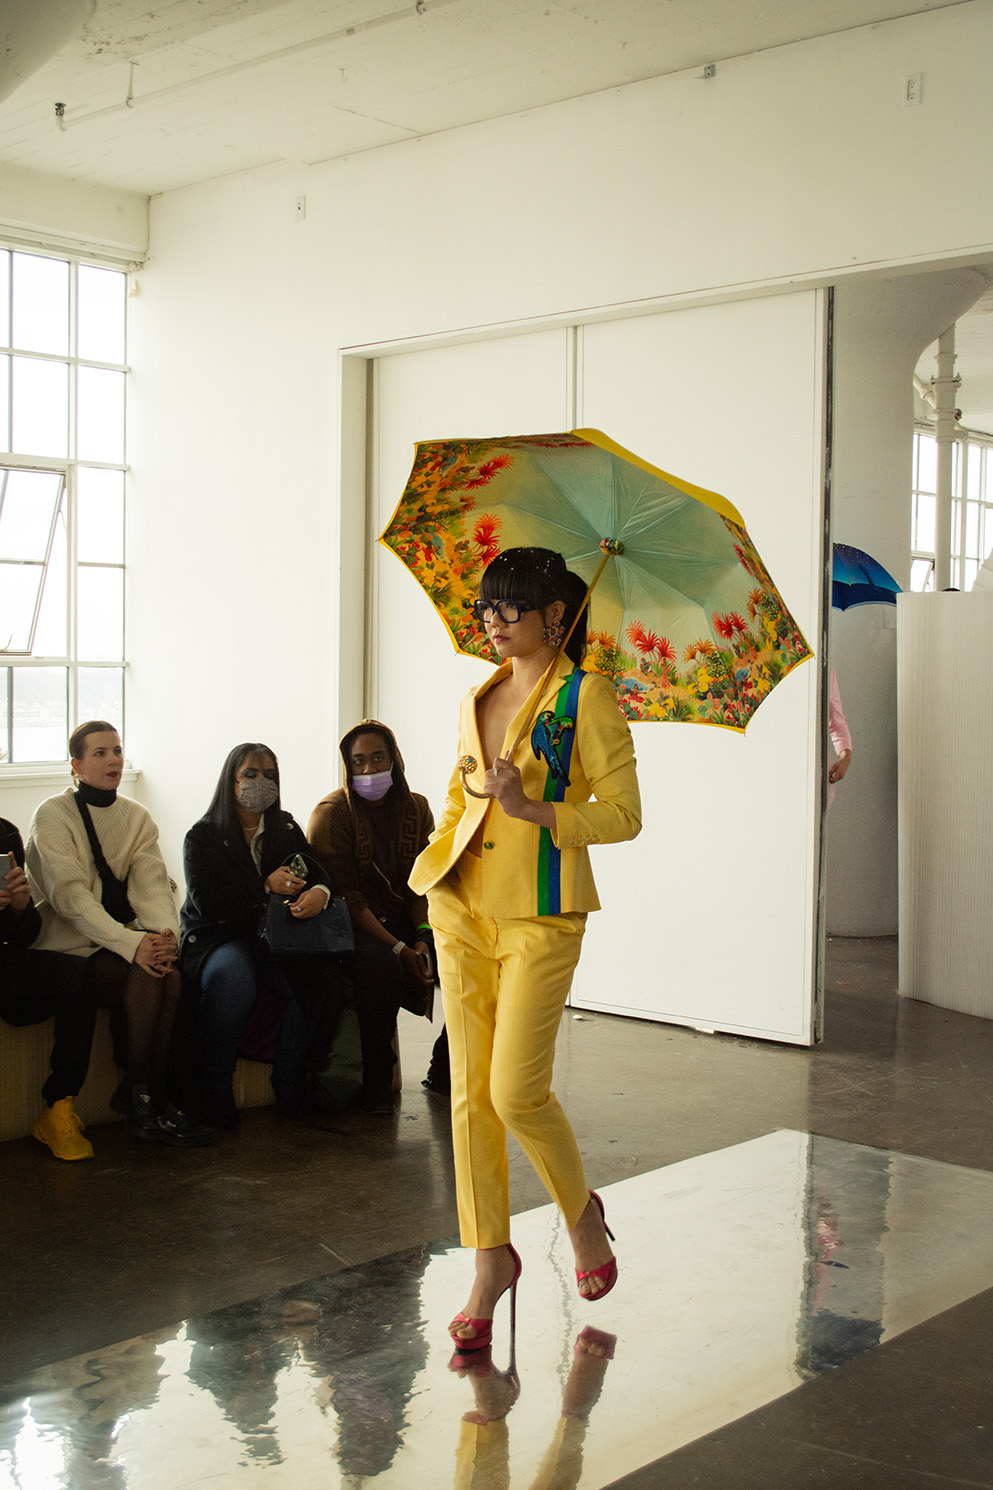 A model walks forward, wearing a yellow suit with a green and blue stripe and a patch shaped like a parrot. She holds a yellow umbrella with flowers painted on the inside.